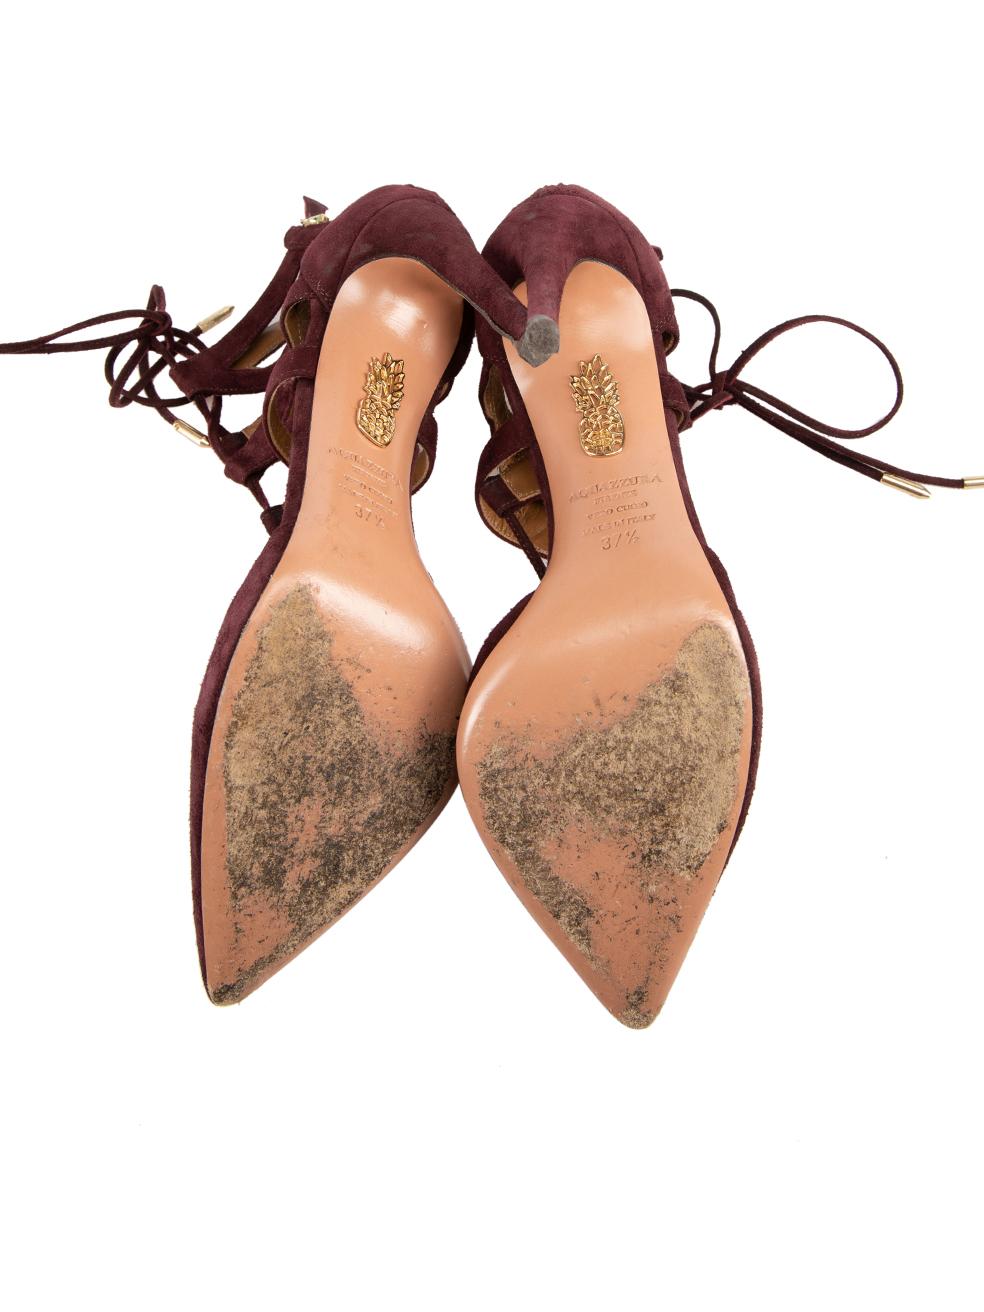 Aquazzura Burgundy Suede Belgiavia Lace Up Heels Size IT 37.5 In Excellent Condition For Sale In London, GB